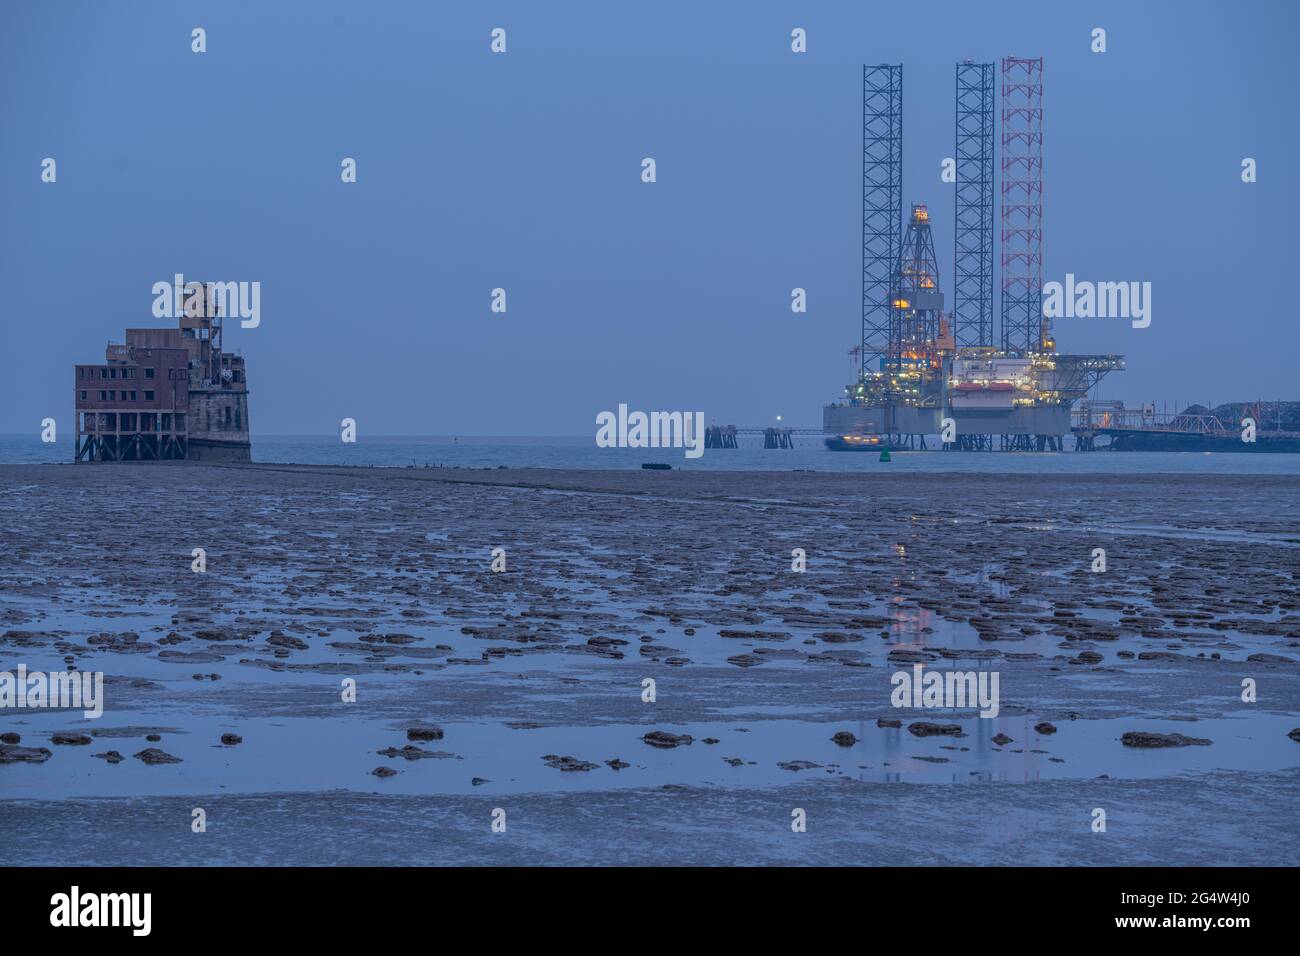 Grain fort in the Swale with drilling rig moored at Sheerness in the background taken at night. Stock Photo